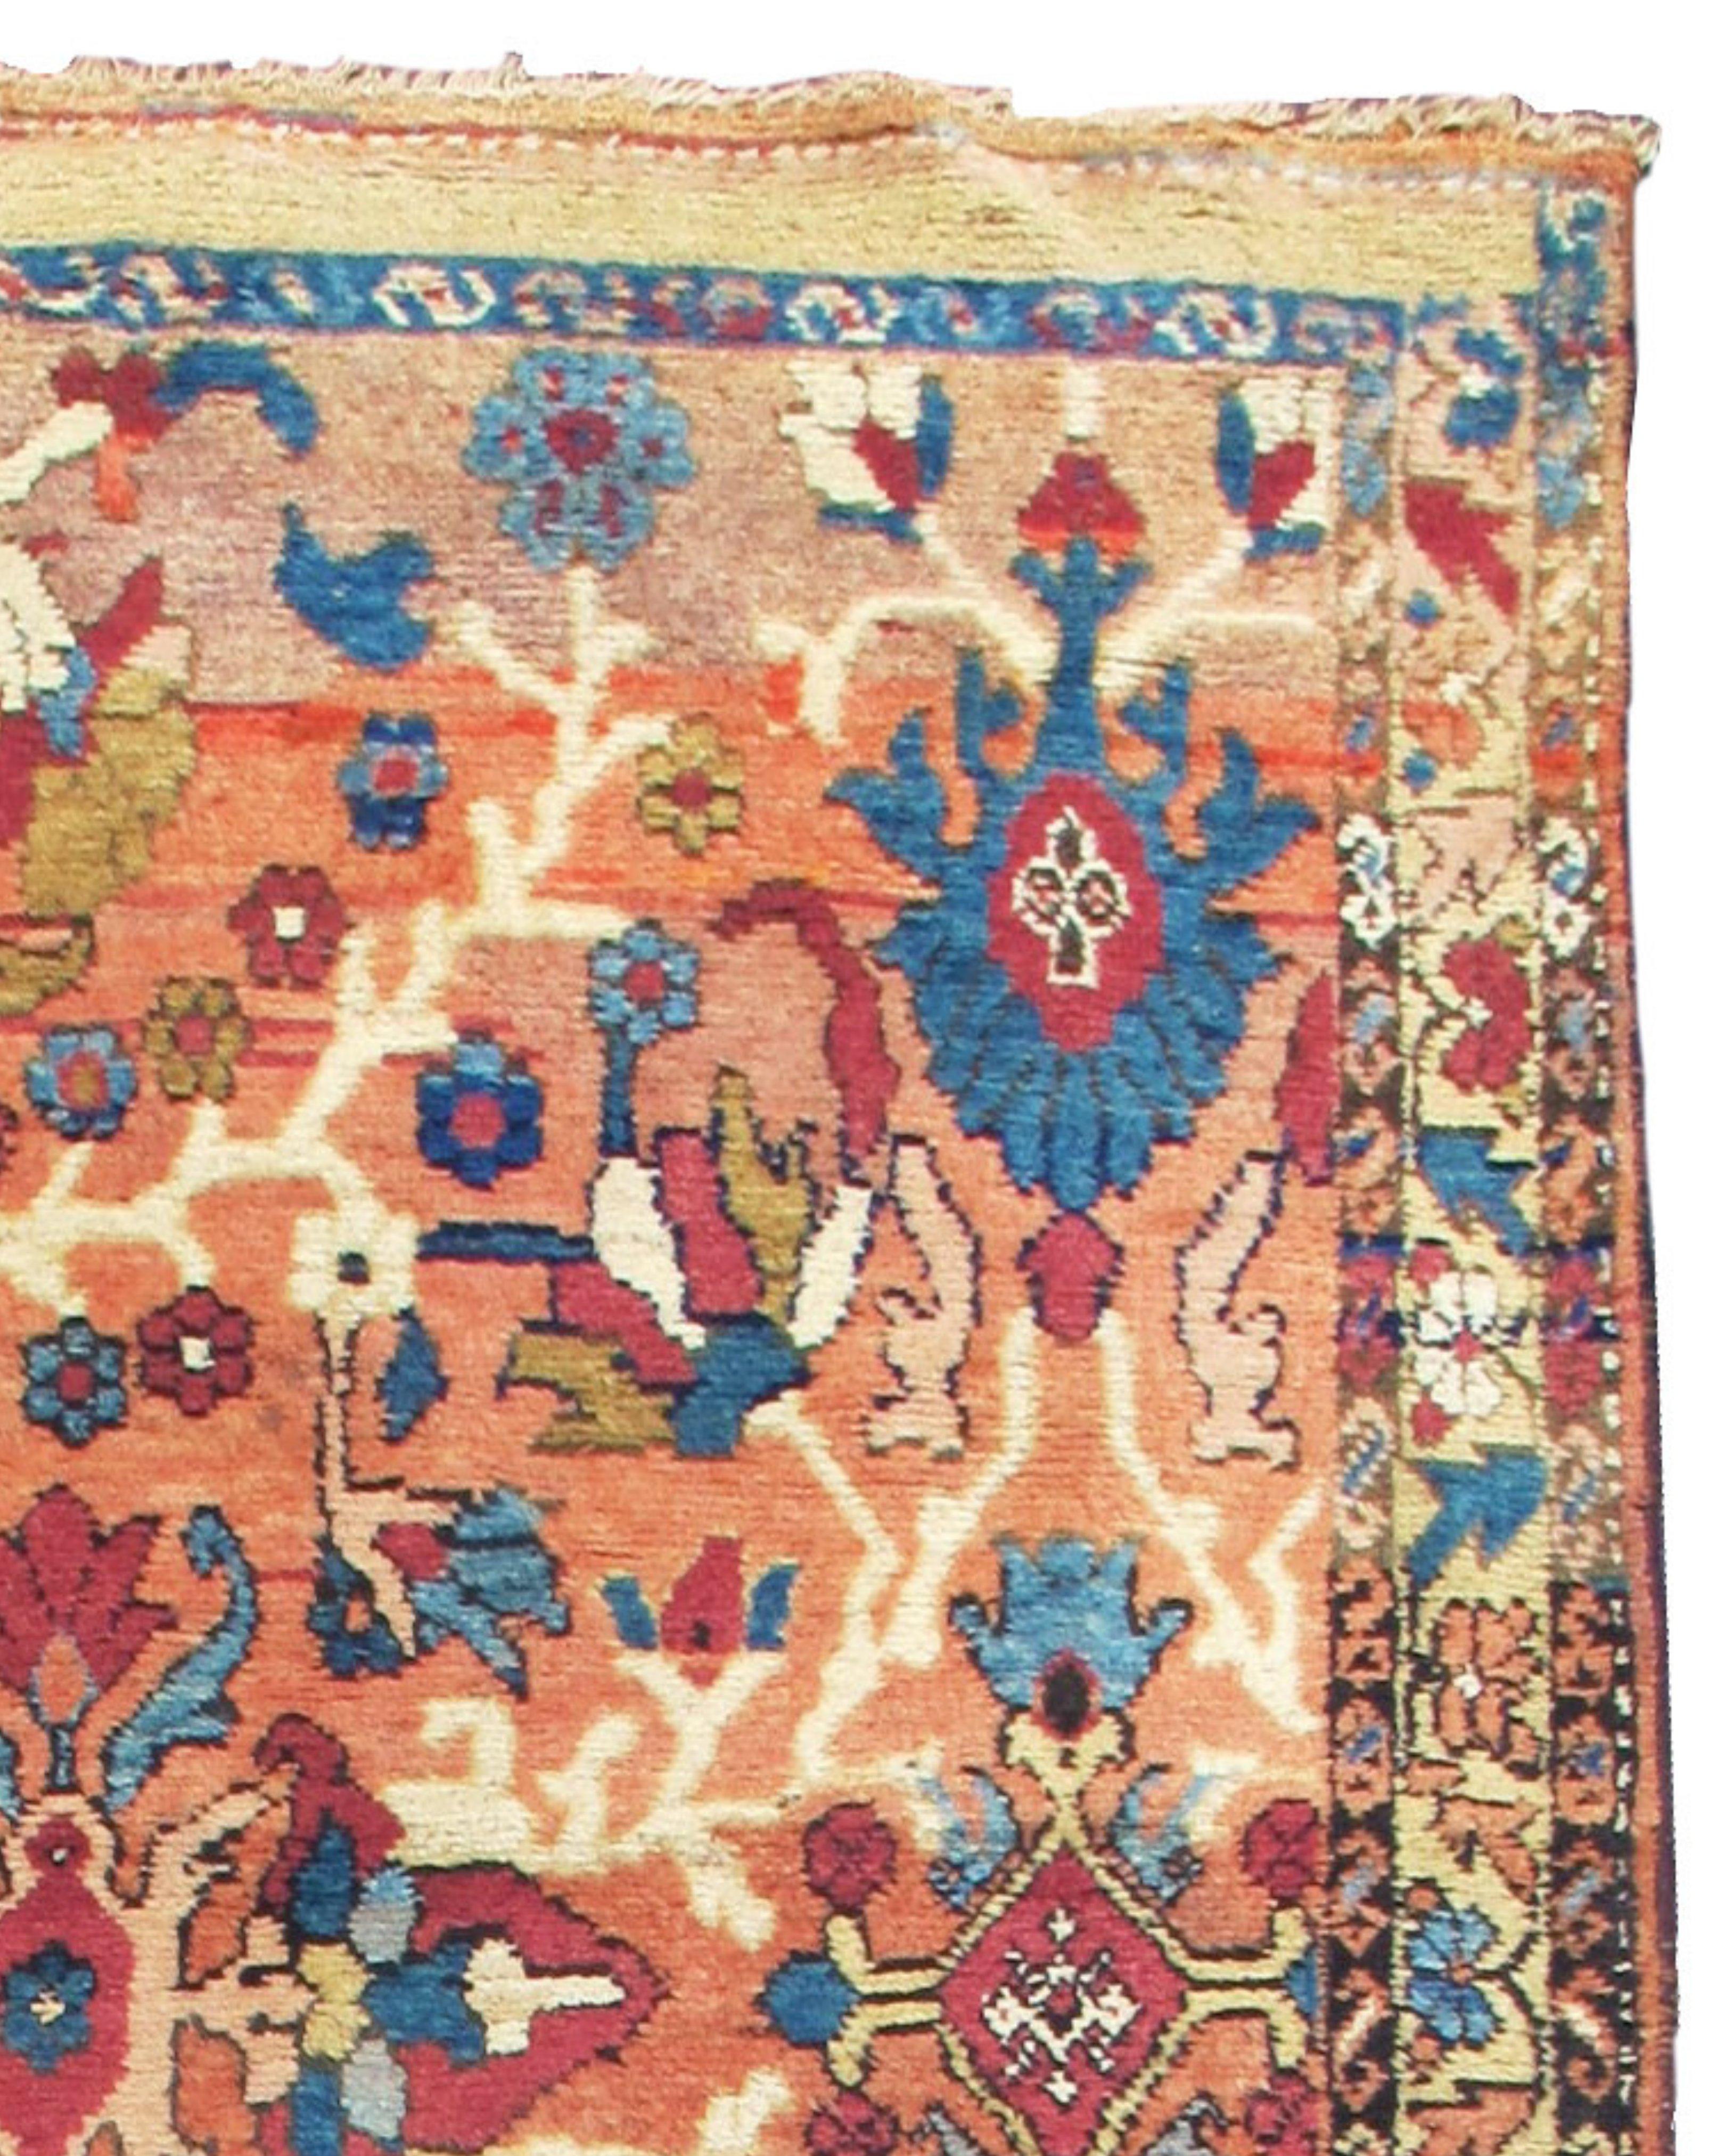 Mahal Sampler (Vagireh) Rug, Late 19th Century

Additional information:
Dimensions: 4'2